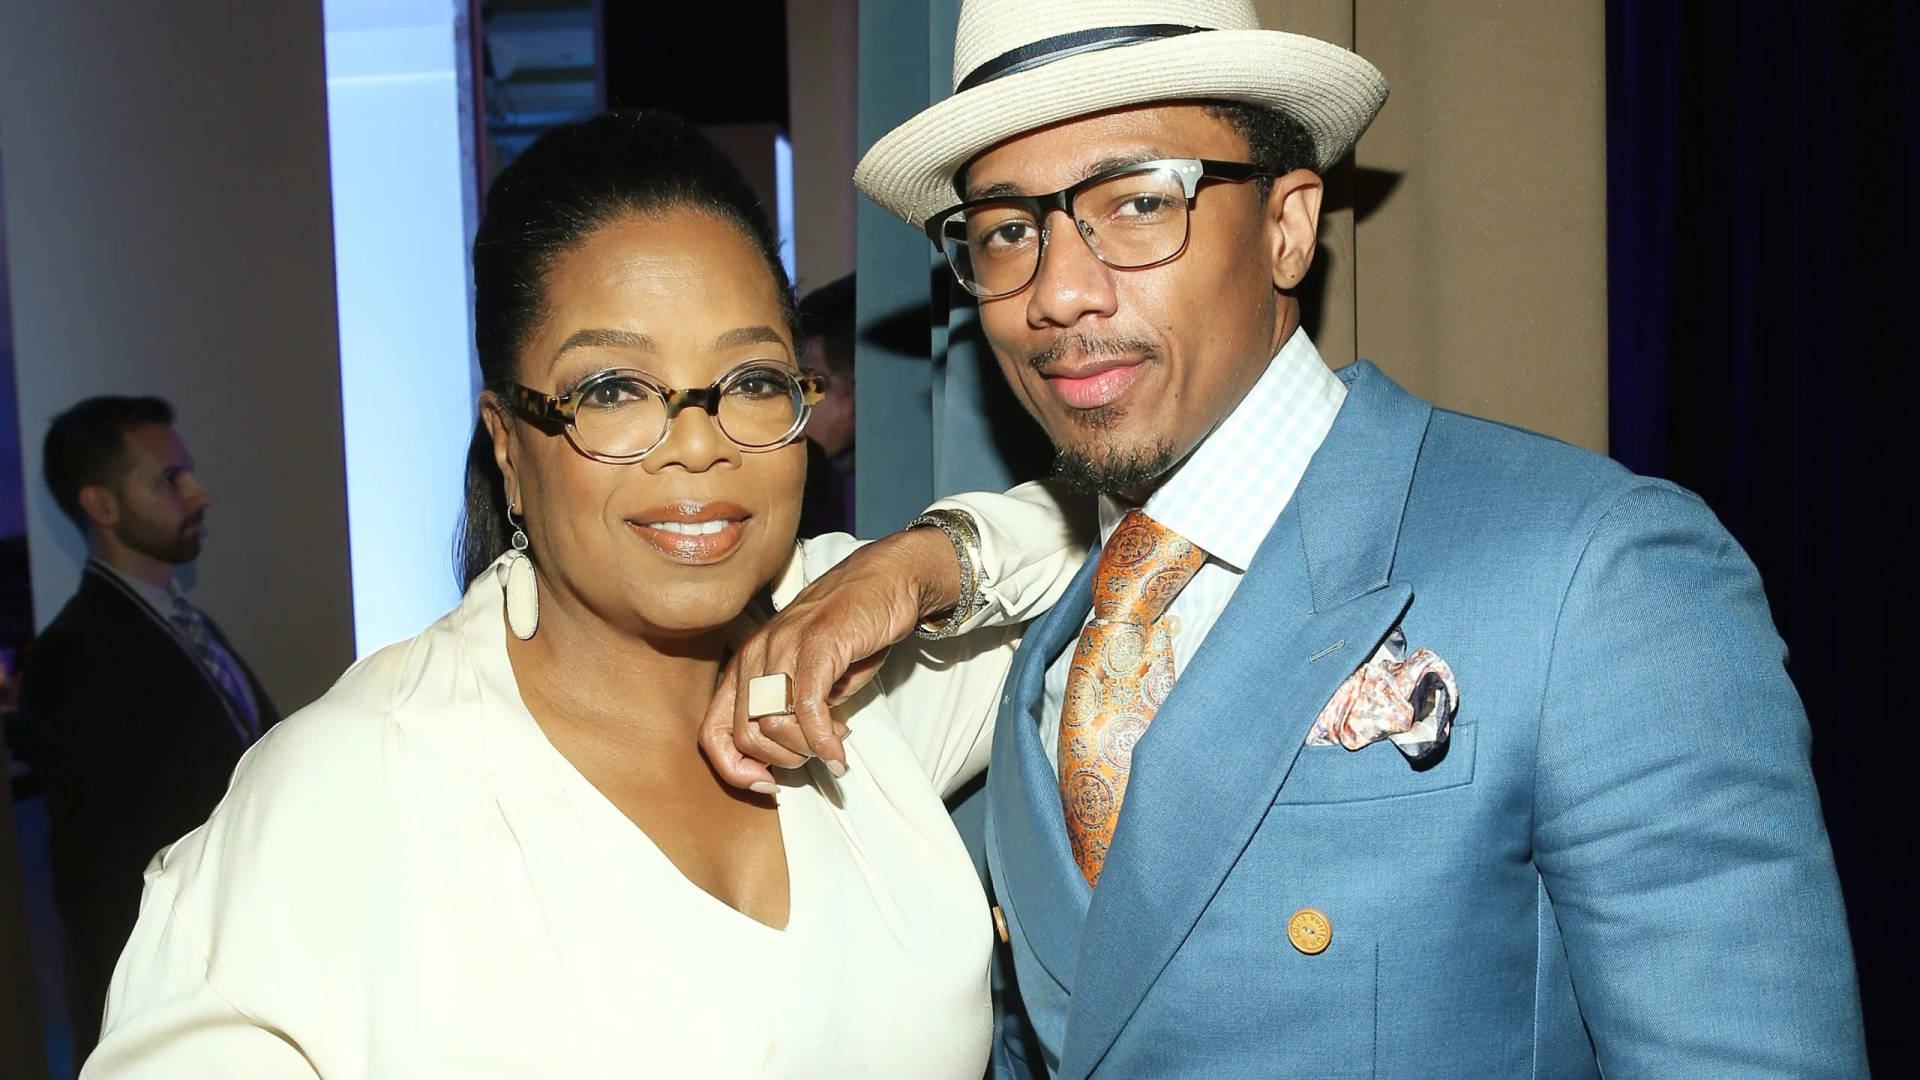 Nick Cannon With Oprah